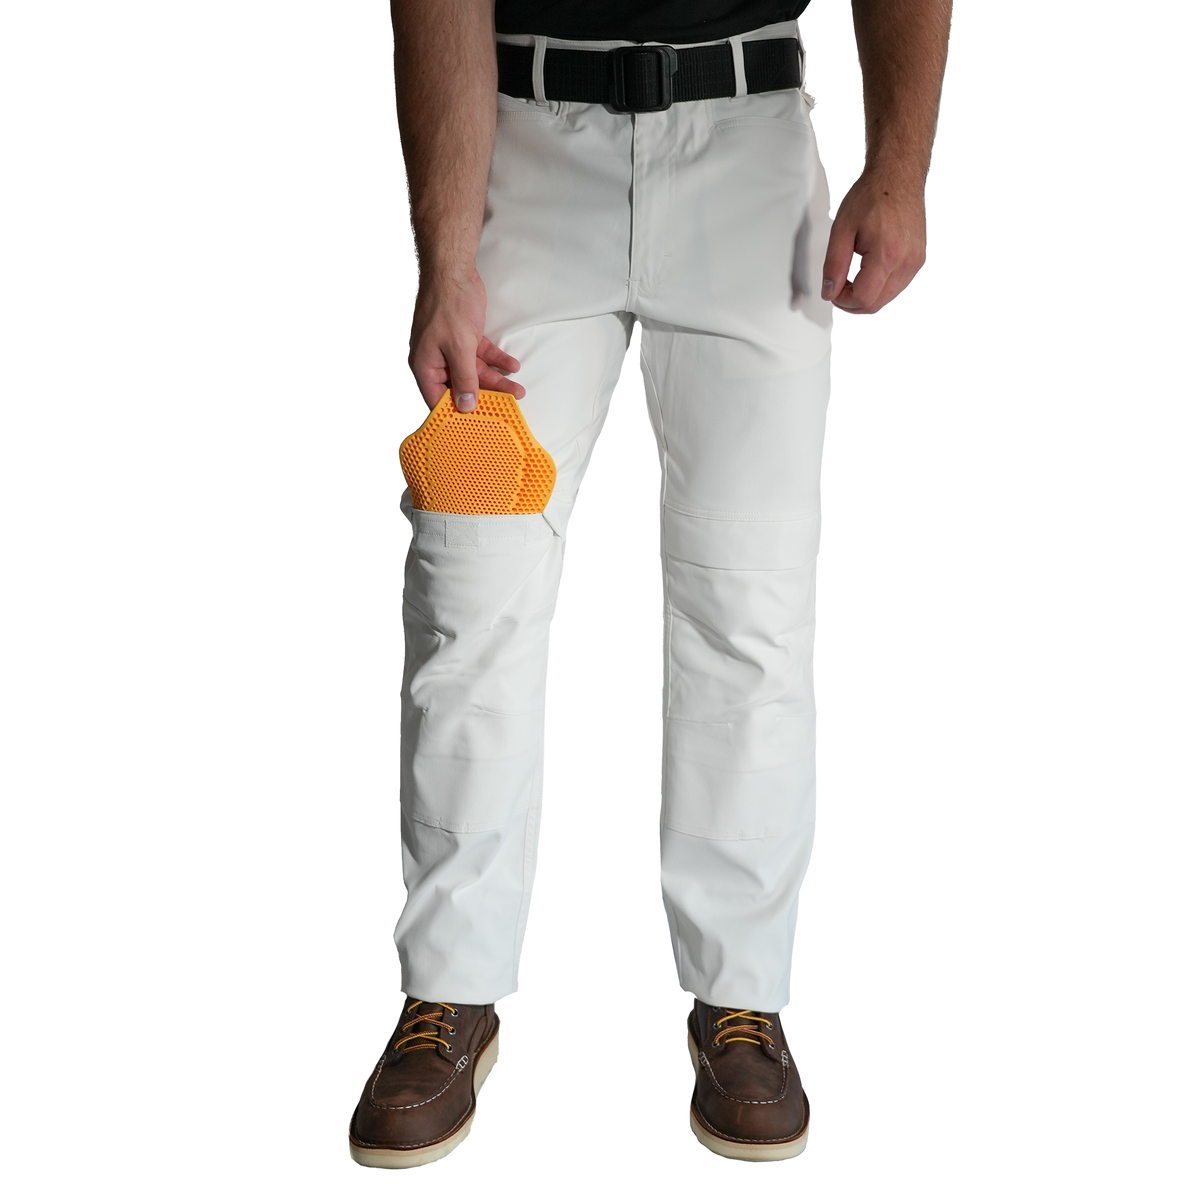 NEW! 054 PAINTER'S-PRO Knee Pad Work Pants- Compatible with SQUISH® Knee  Pad Inserts